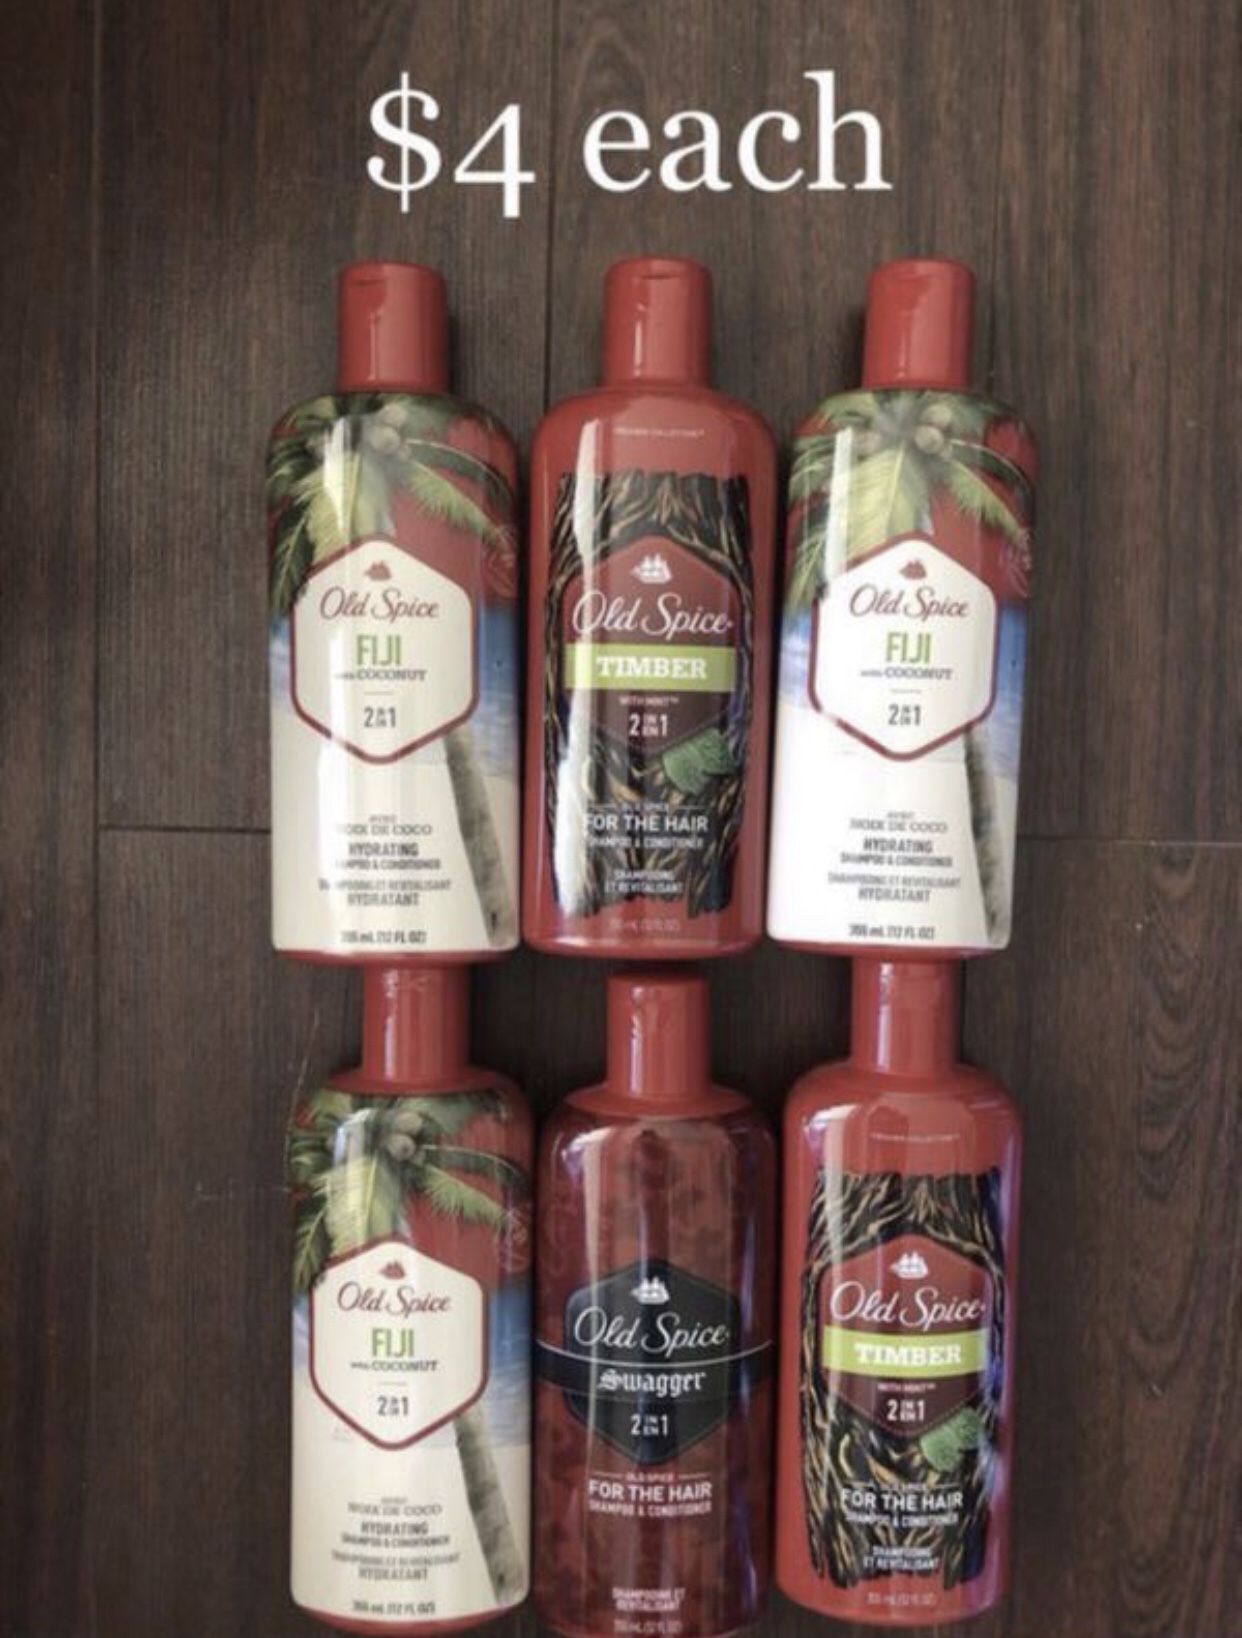 Old Spice 2 in 1 Shampoo & Conditioner $4 each